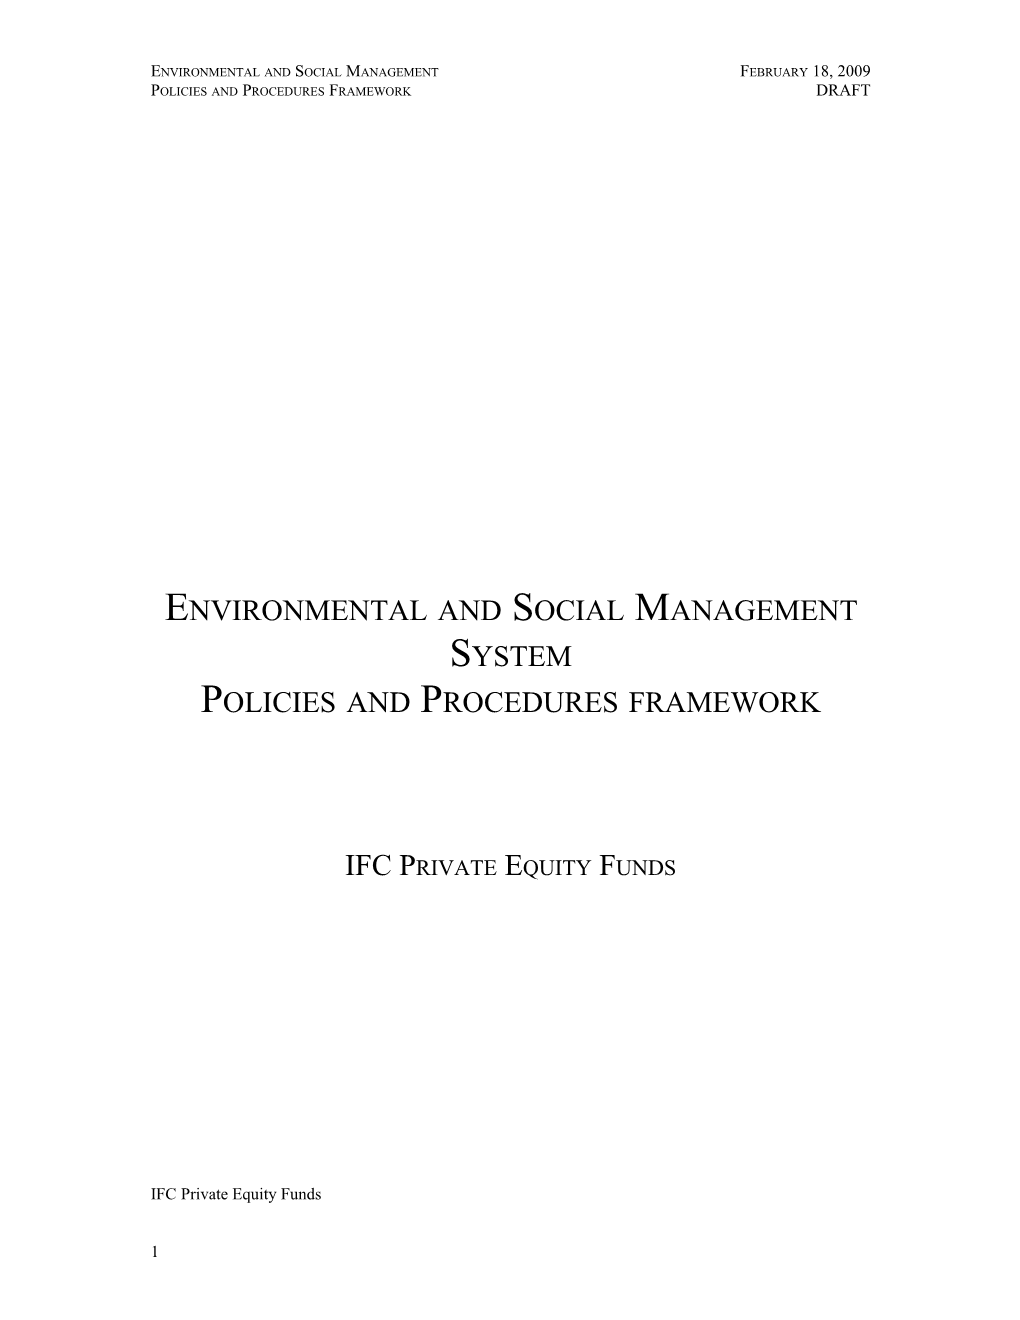 Environmental and Social Management System